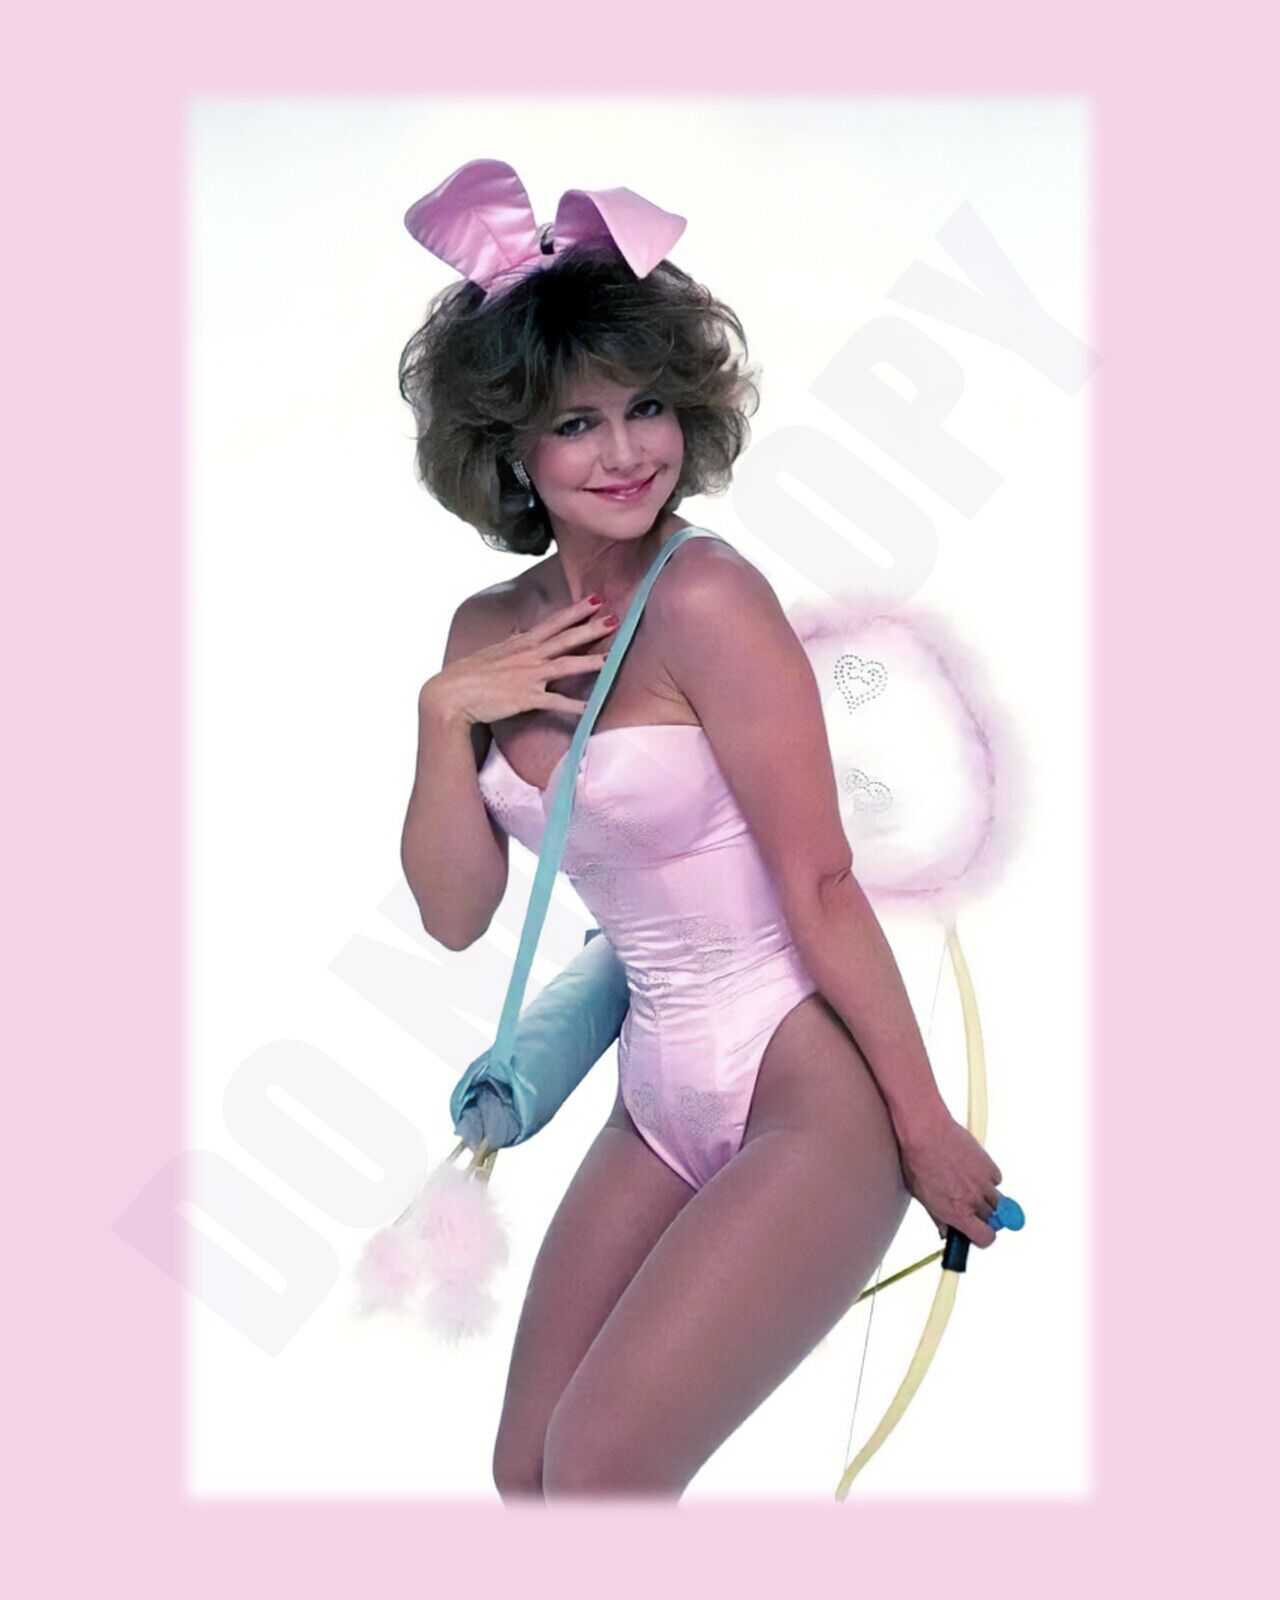 1986 SALLY FIELD Looking Sexy In Her Playboy Bunny Costume Outfit 8x10 Photo